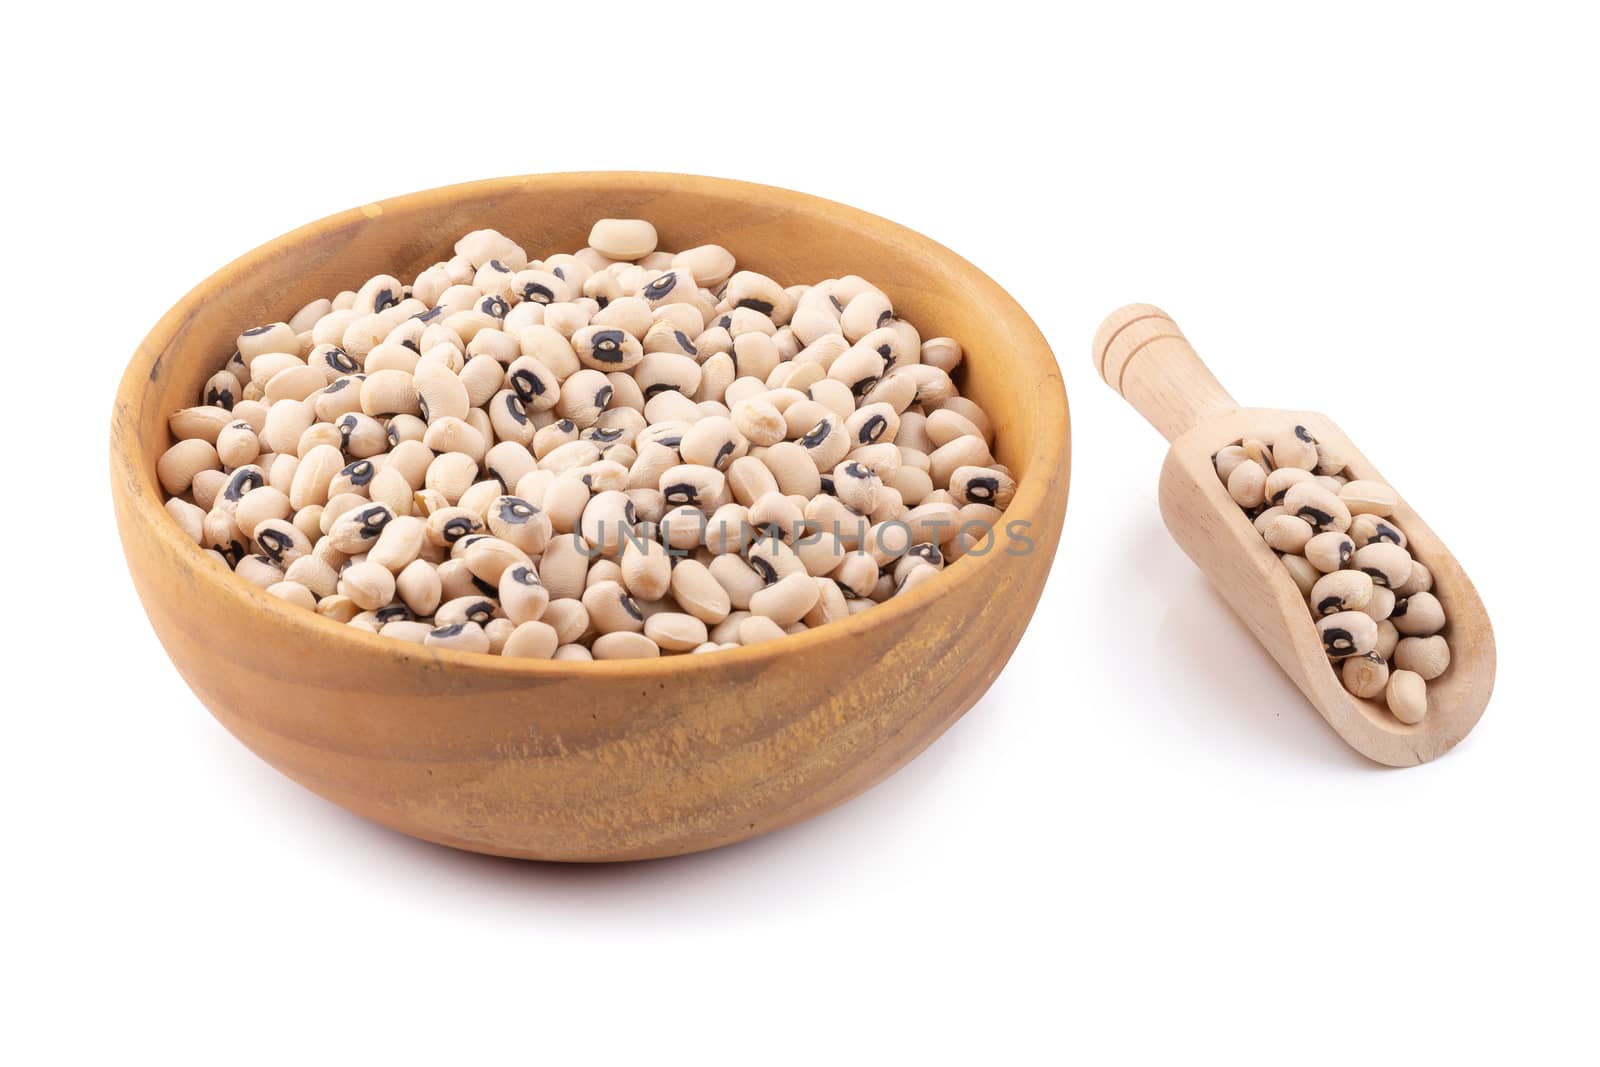 Black-eyed peas in a wooden bowl isolated on a white background by kaiskynet